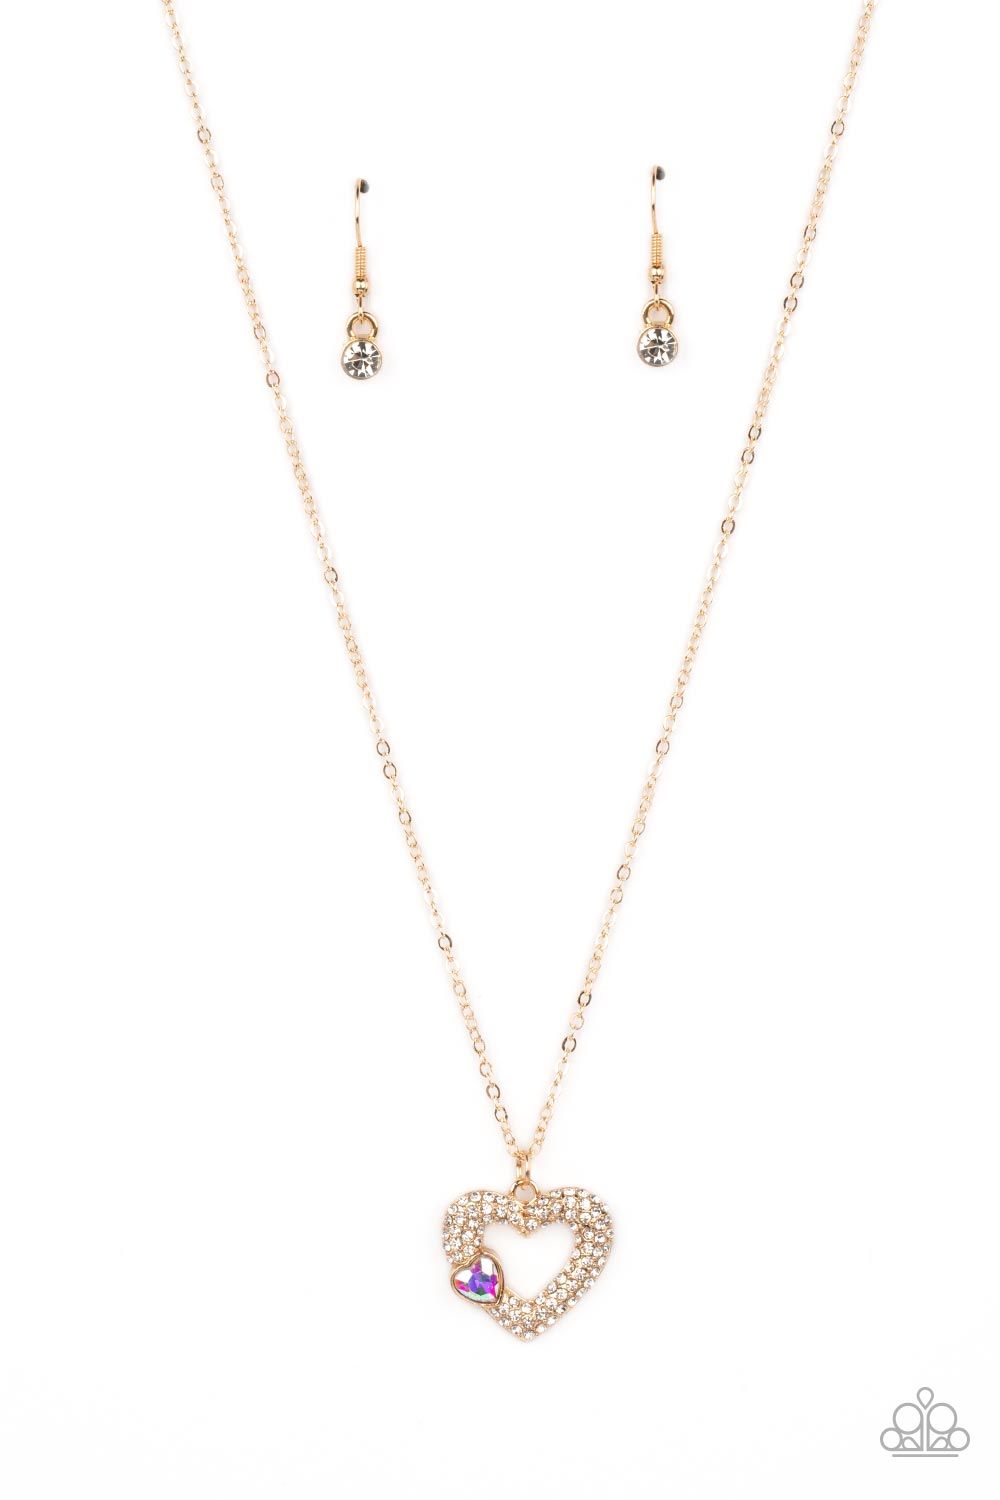 Bedazzled Bliss Multi & Gold Heart Necklace - Paparazzi Accessories- lightbox - CarasShop.com - $5 Jewelry by Cara Jewels